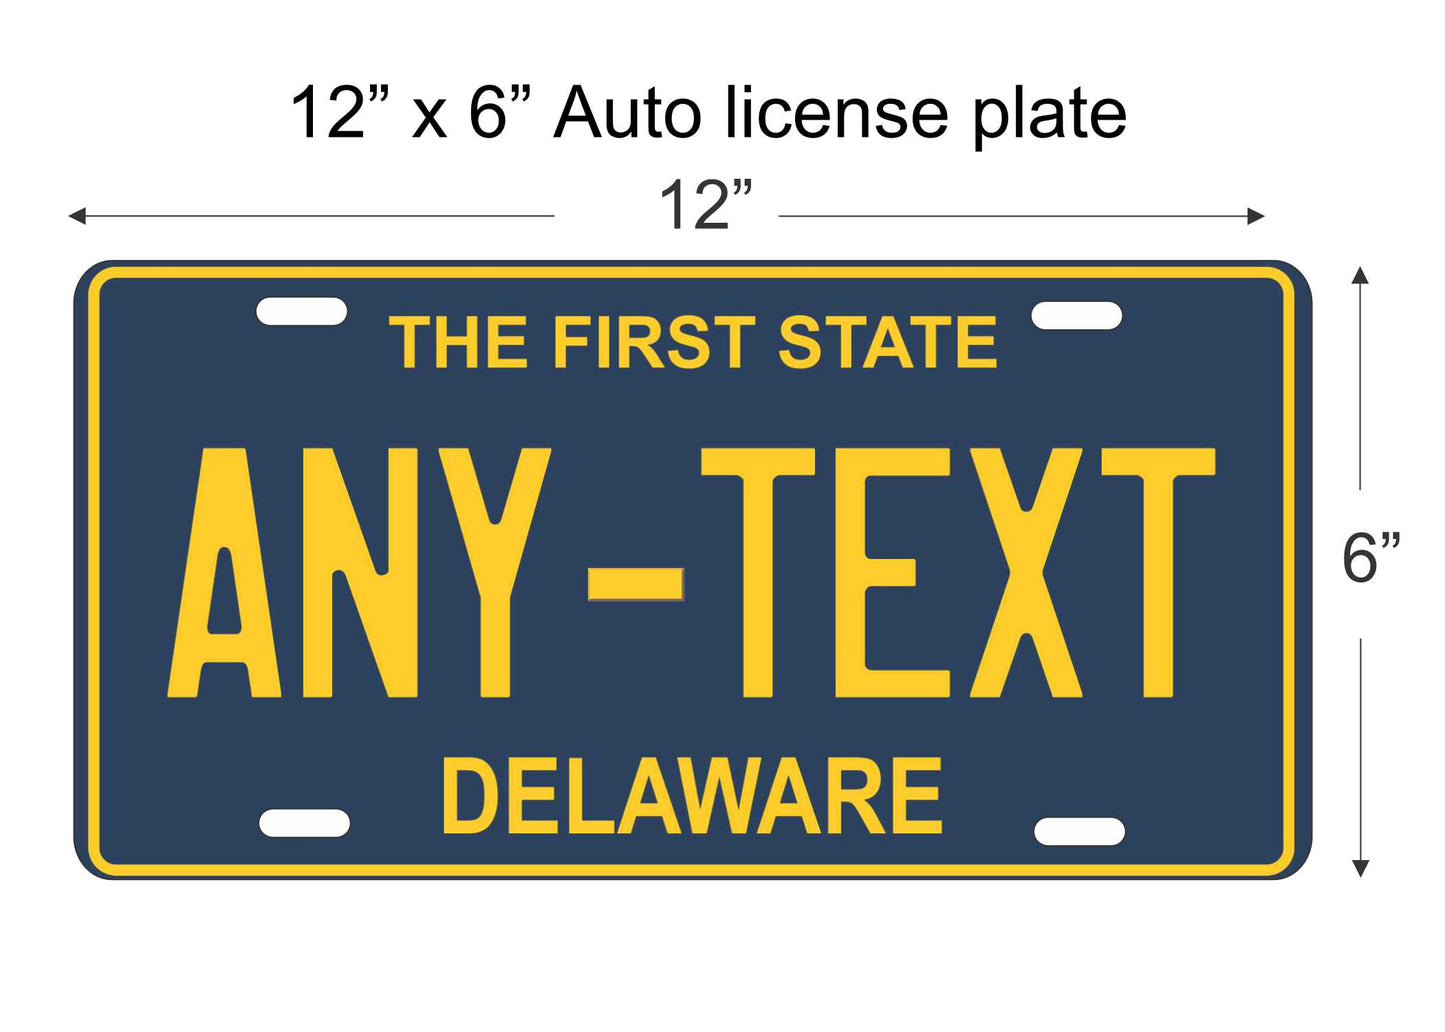 Delaware state personalized novelty vanity front license plate replica decorative aluminum sign car tag